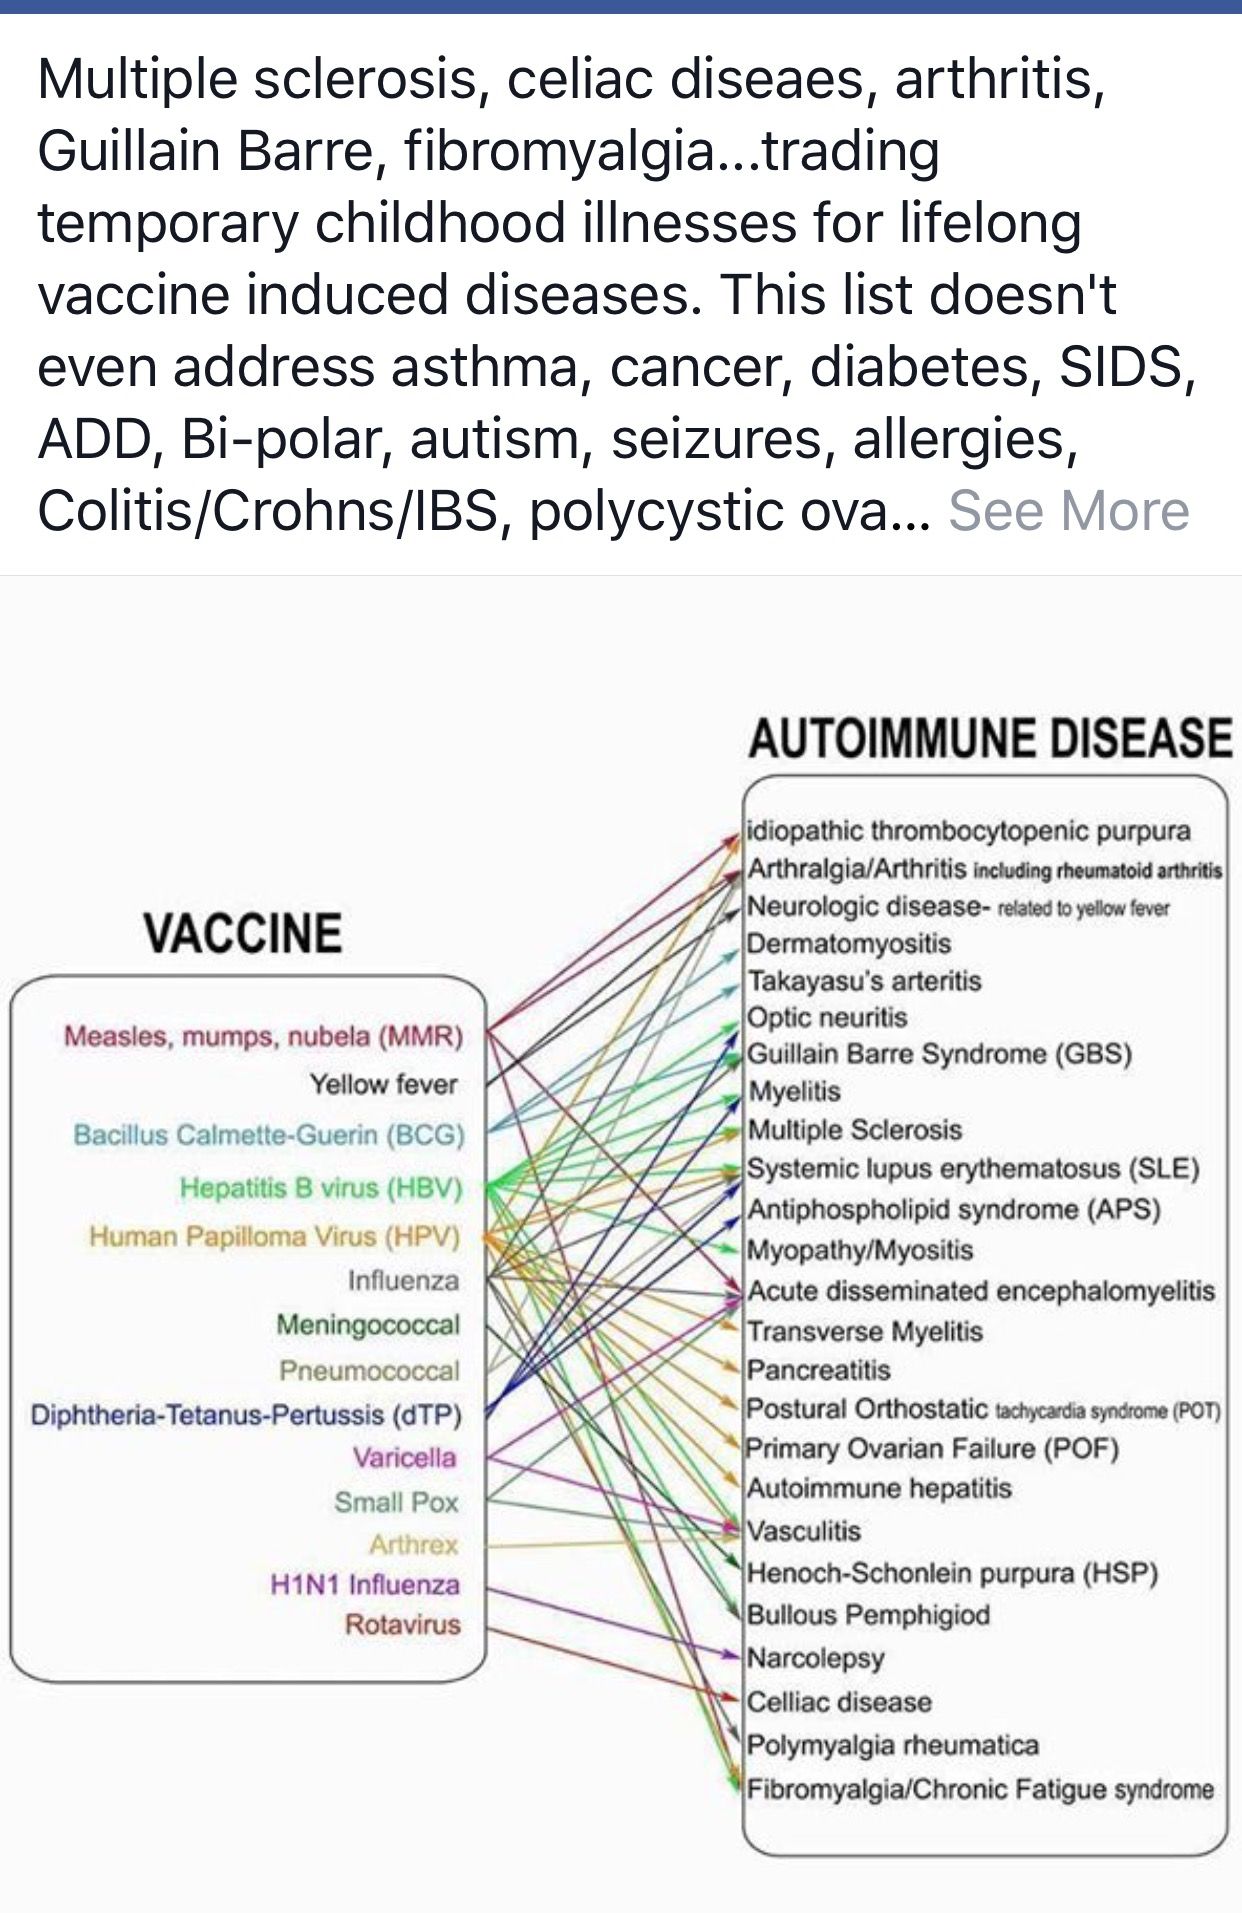 an example of an autoimmune disease is quizlet